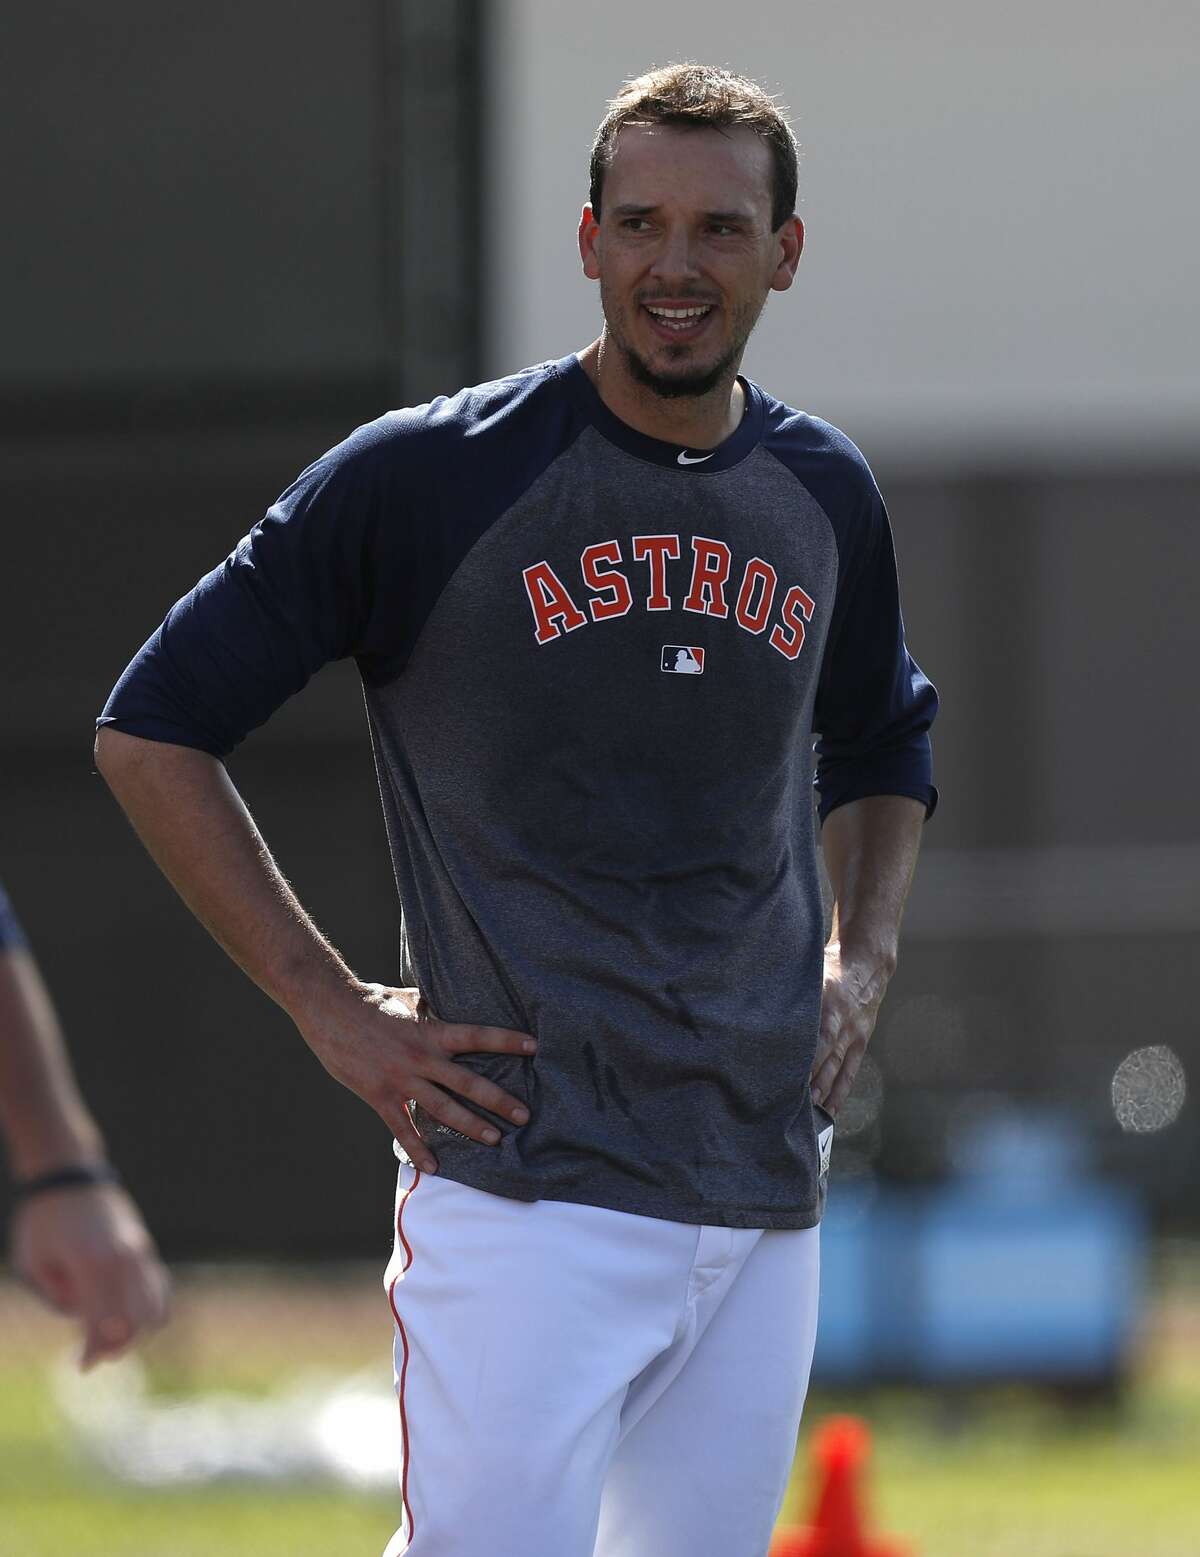 Houston Astros pitcher Charlie Morton (50) during spring training at The Ballpark of the Palm Beaches, in West Palm Beach, Florida, Friday, February 24, 2017. ( Karen Warren / Houston Chronicle )